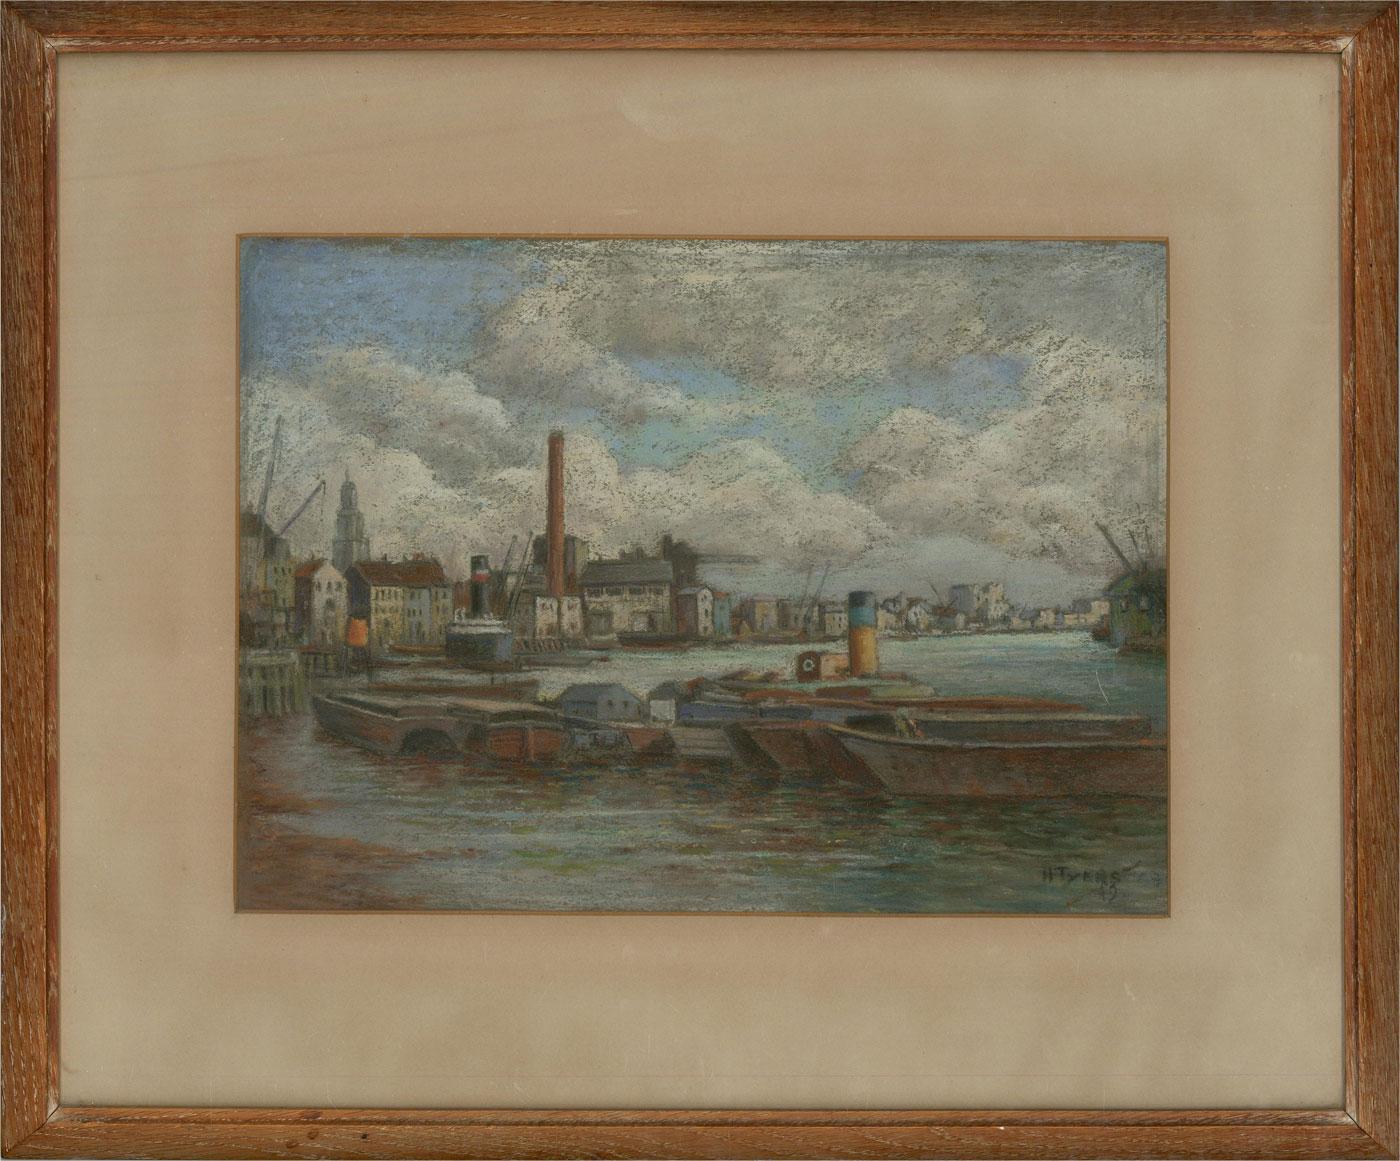 A characterful mid century pastel study the waterline of a riverside city. There are boats moored at a small river beach in the foreground and an industrial skyline is set against fluffy white clouds in a blue sky. The drawing is signed and dated in